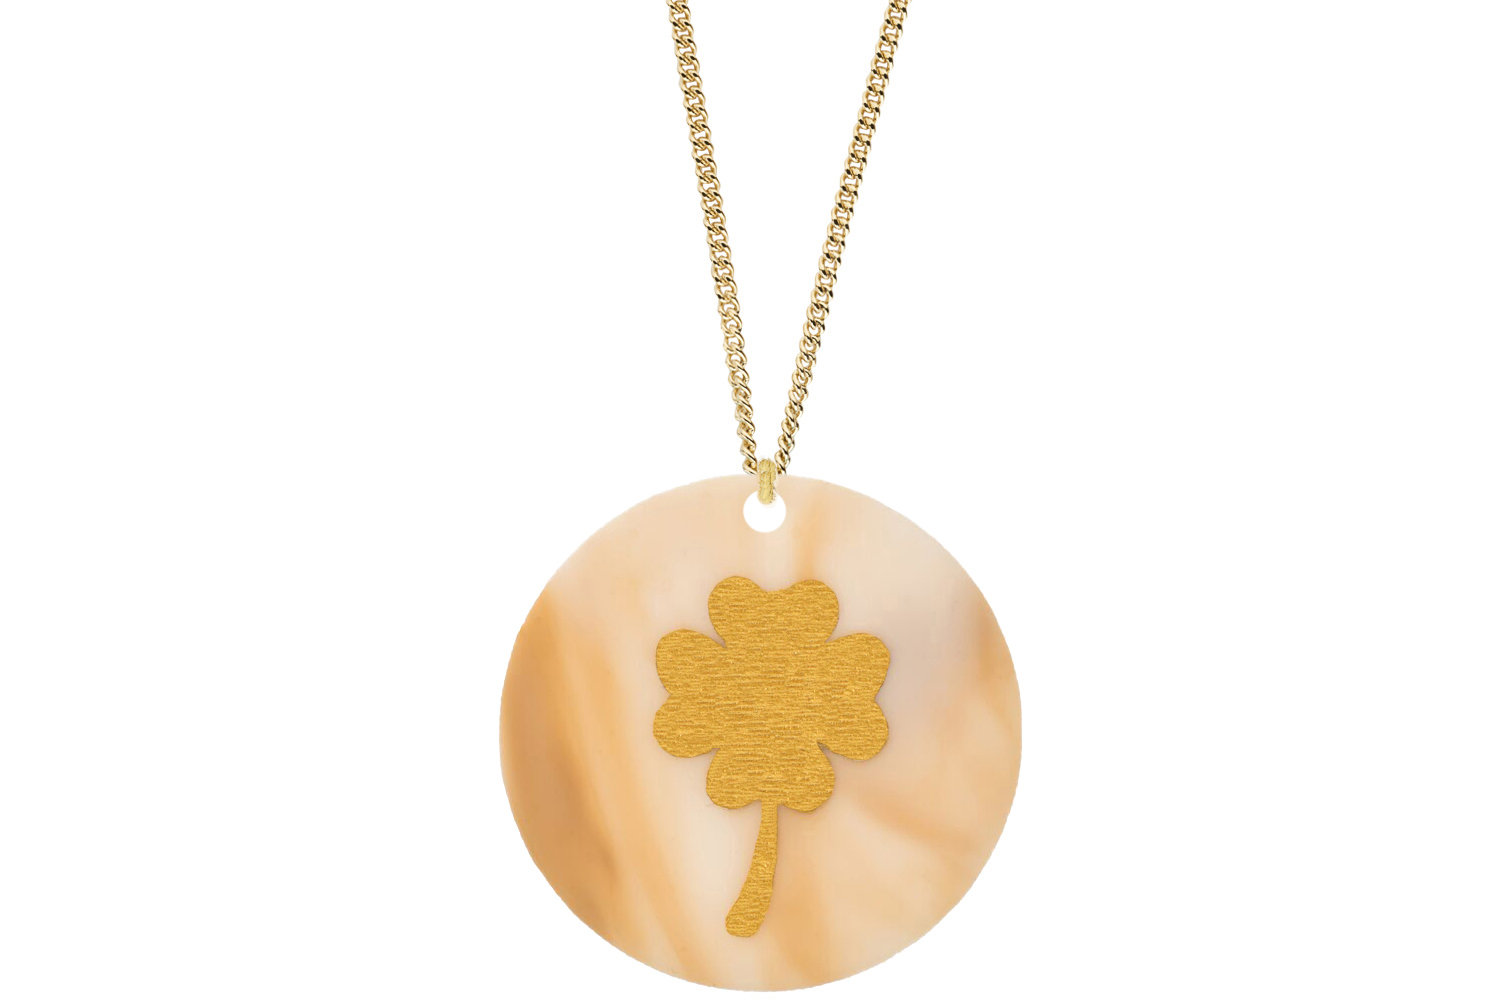 Clover Pendant Subtle Style Refined with Paint on Chain Necklace